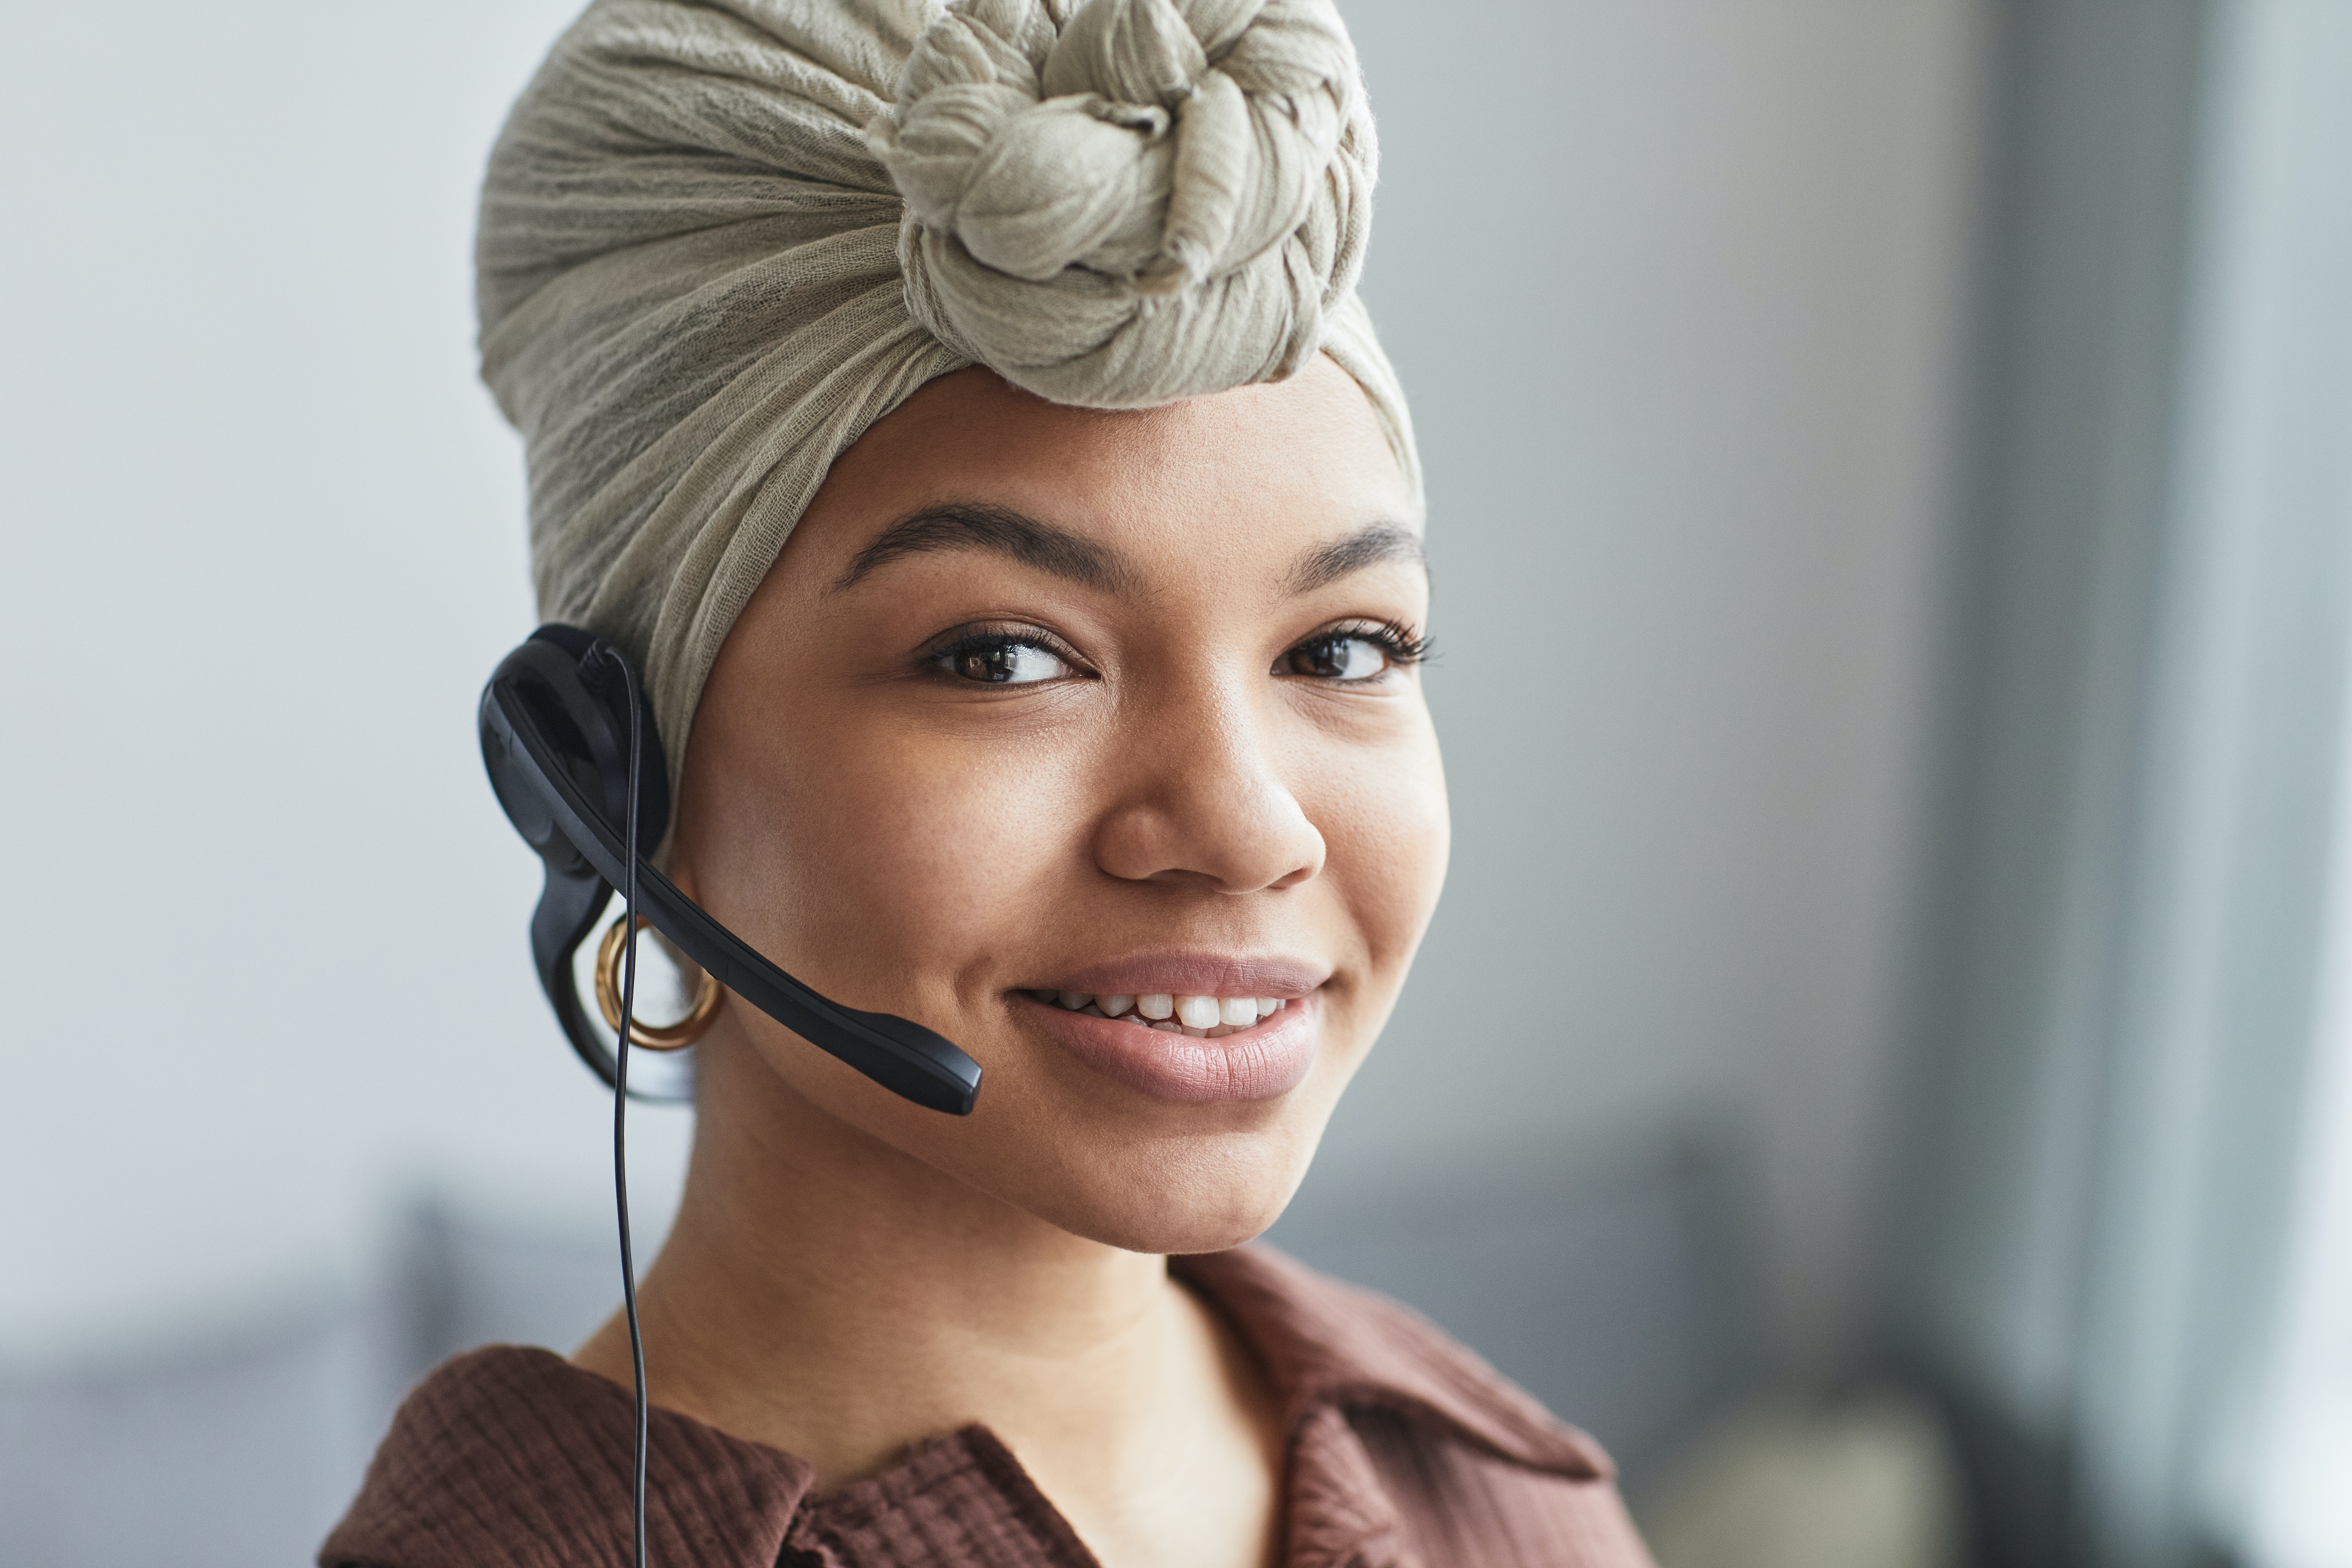 Ethnic woman talking on a telephone headset